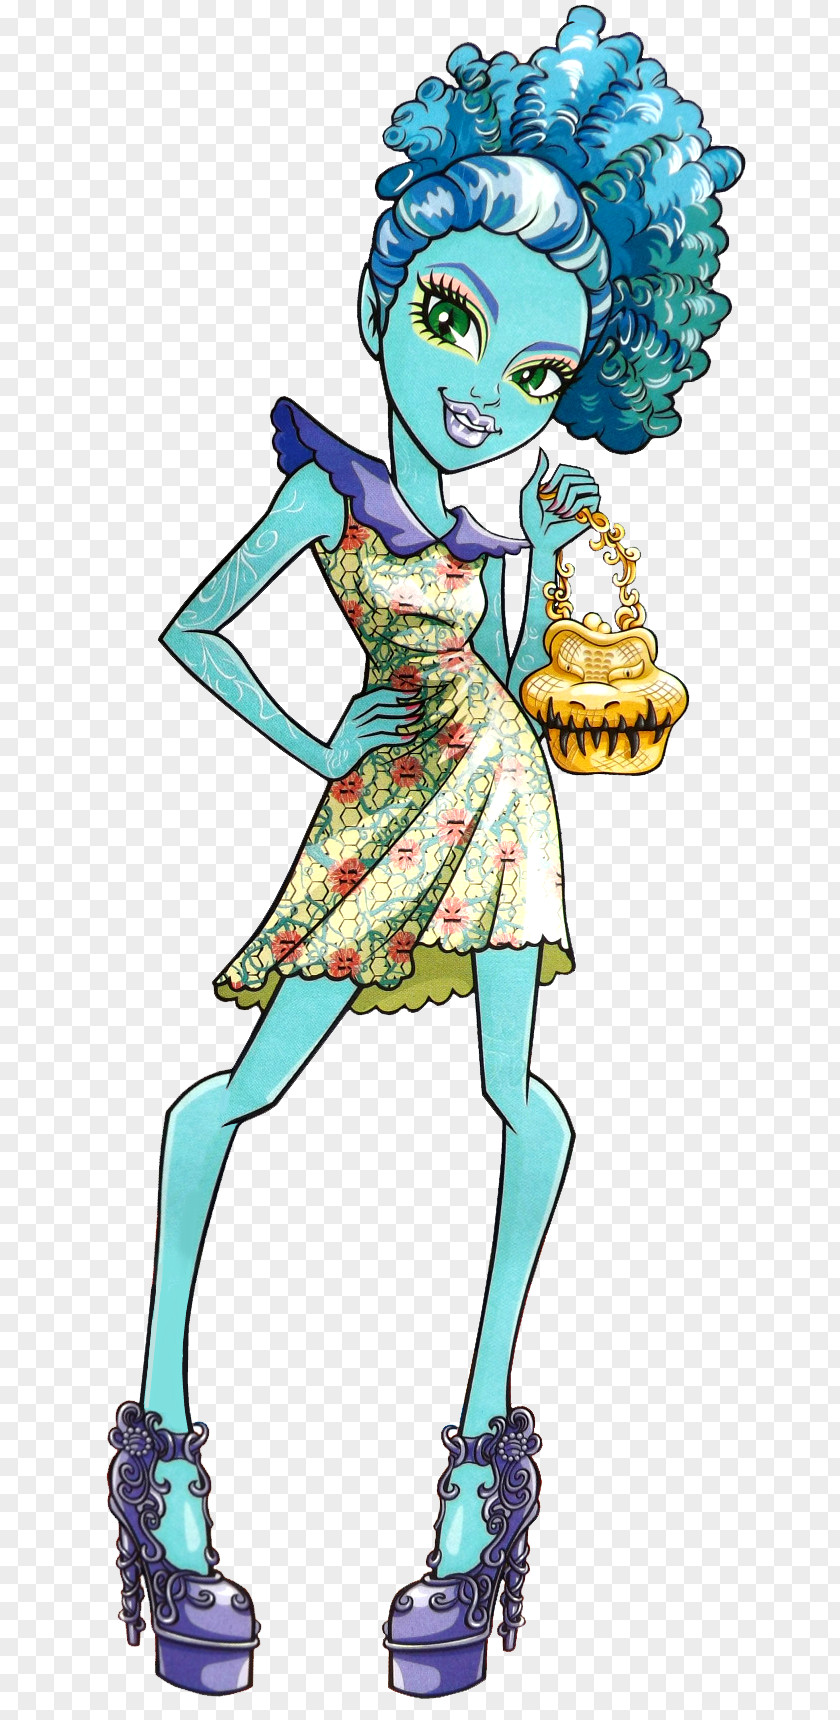 Doll Honey Island Swamp Monster High Toy PNG